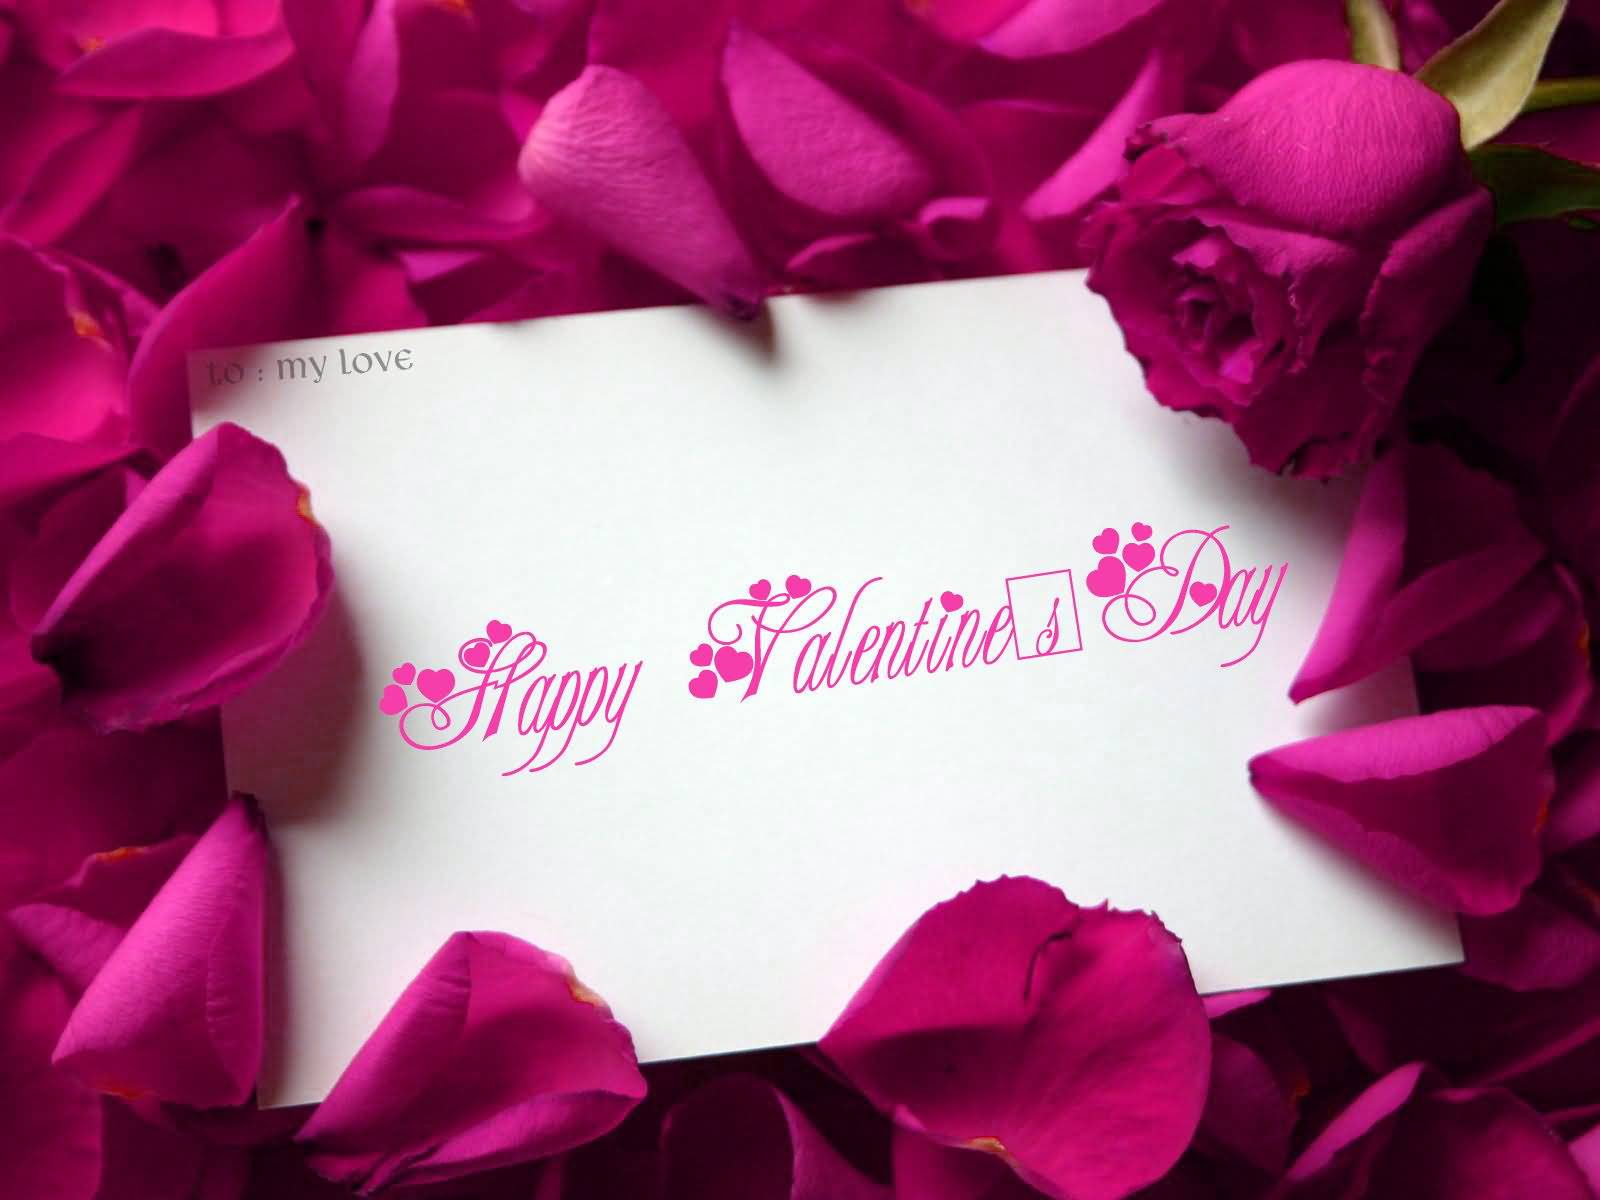 Happy Valentine's Day Greeting Card With Flower Petals